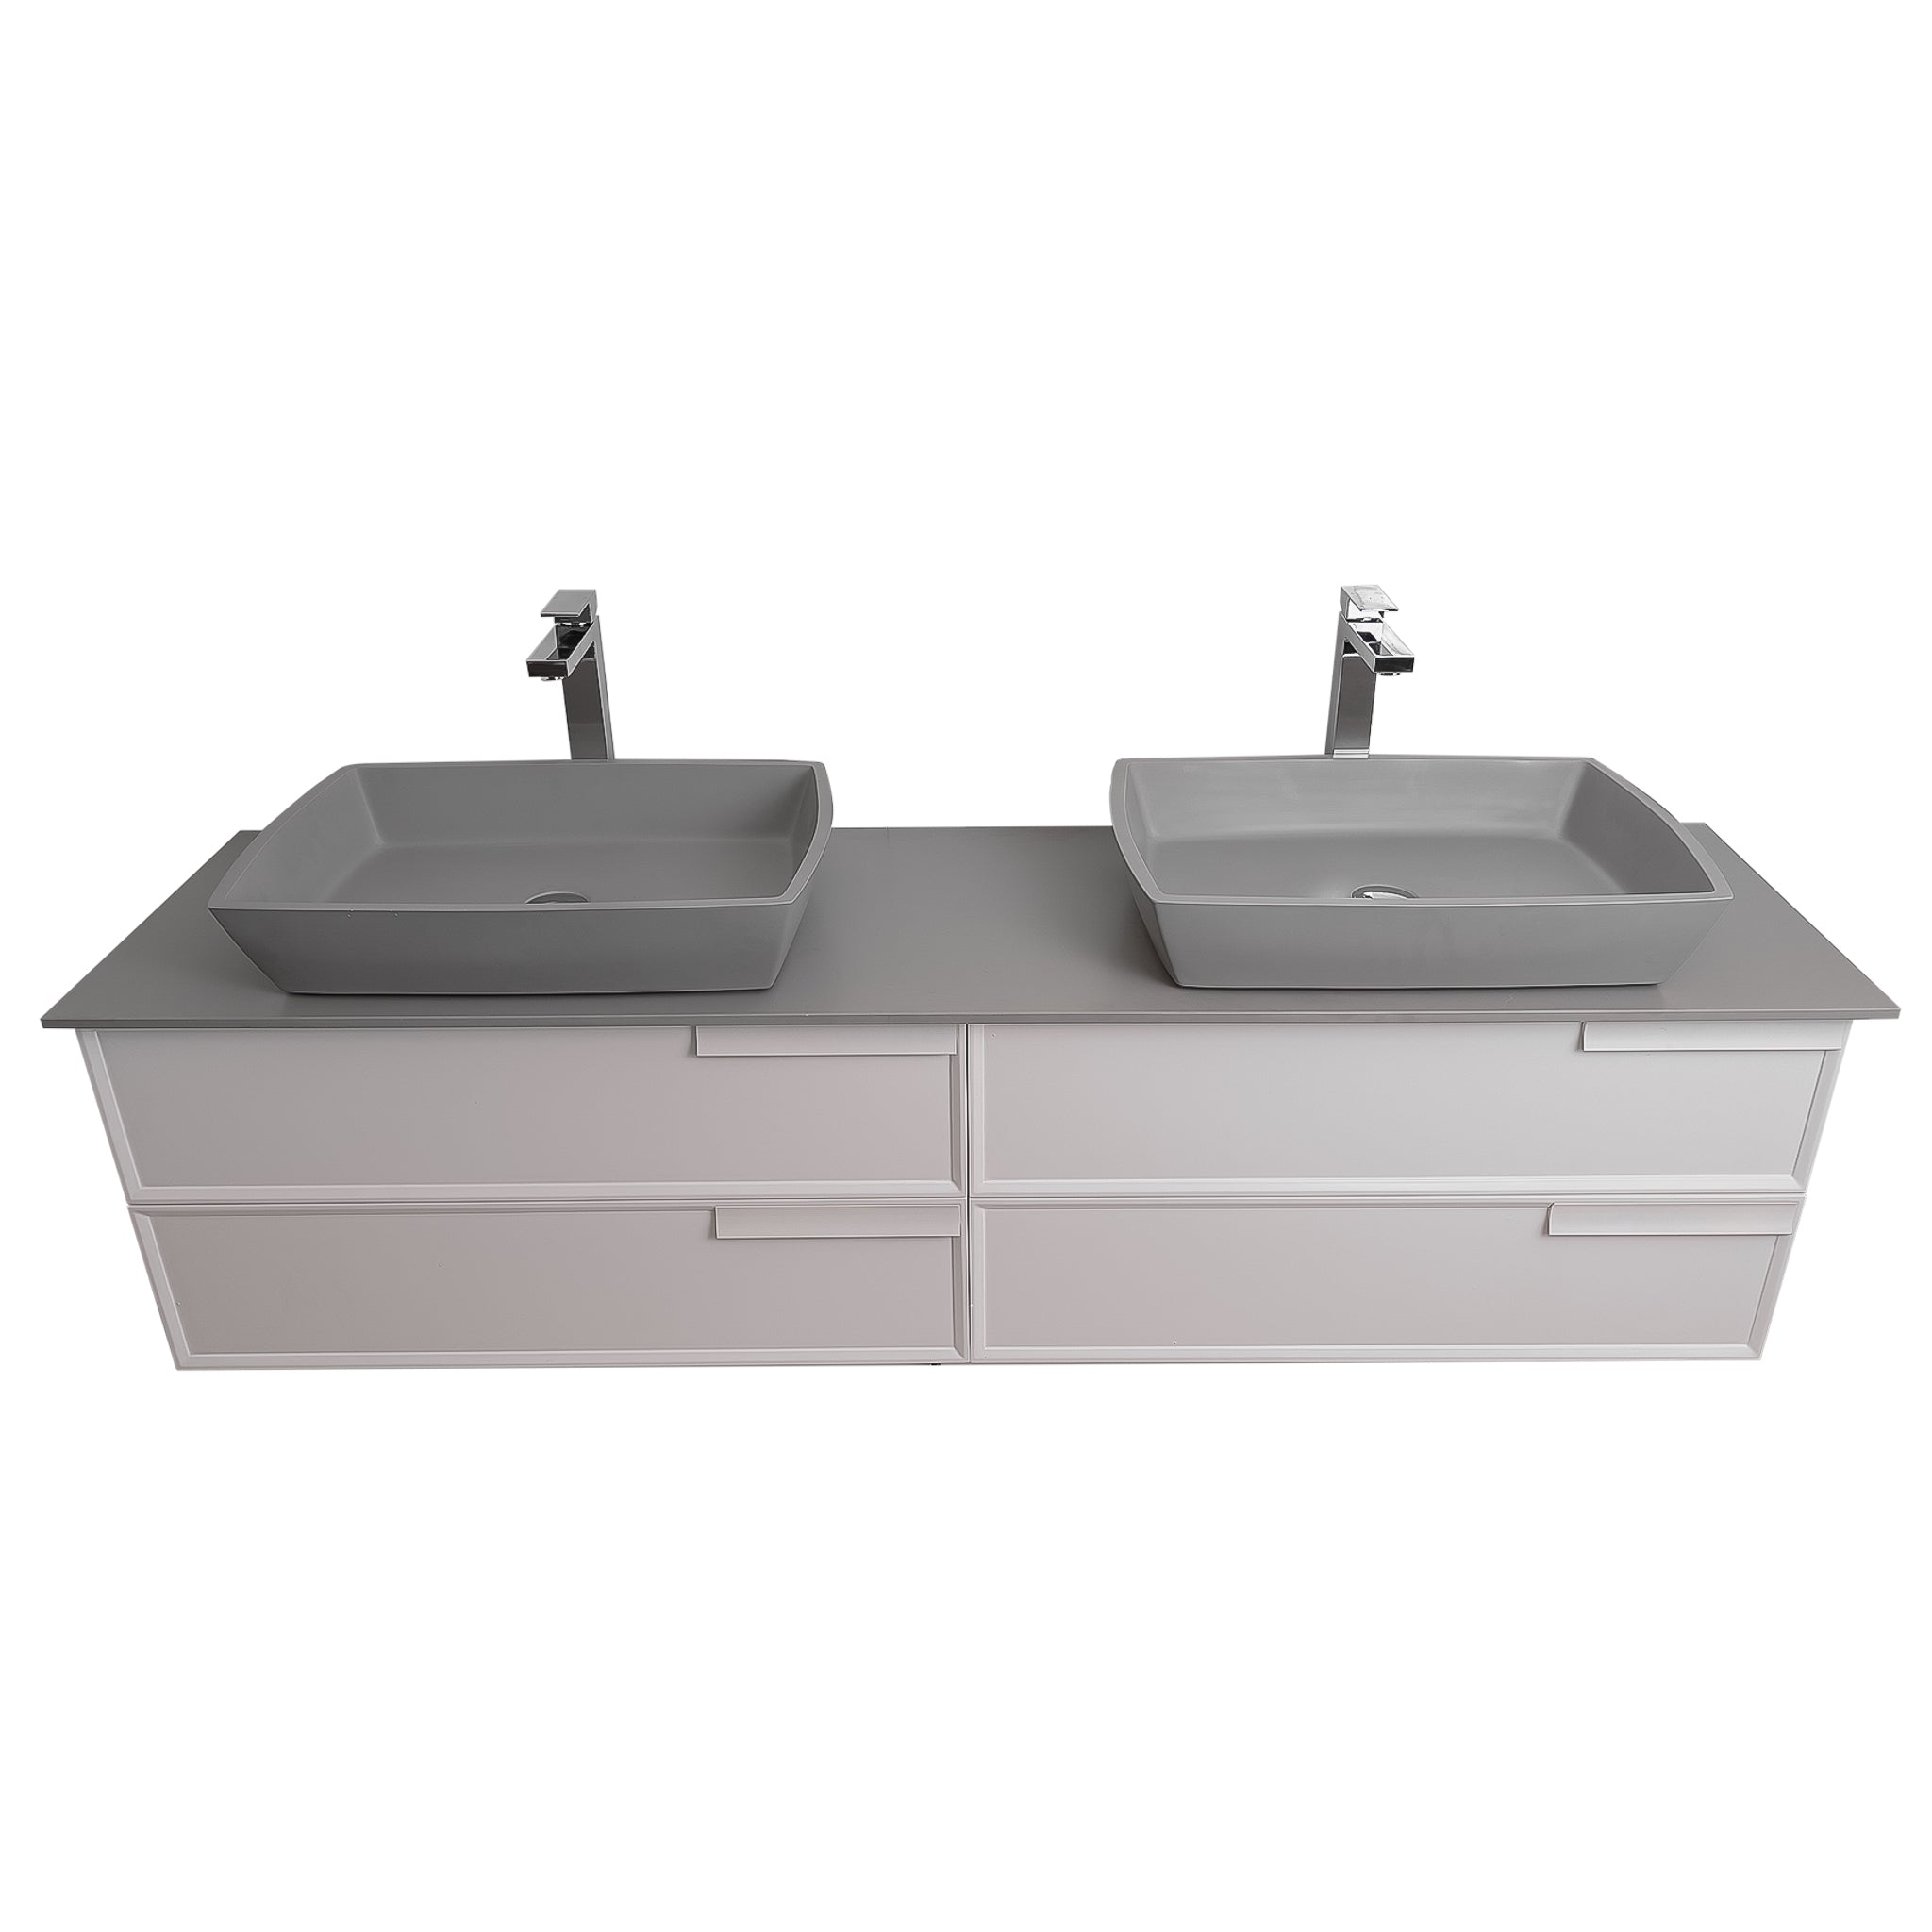 Garda 63 Matte White Cabinet, Solid Surface Flat Grey Counter and Two Square Solid Surface Grey Basin 1316, Wall Mounted Modern Vanity Set